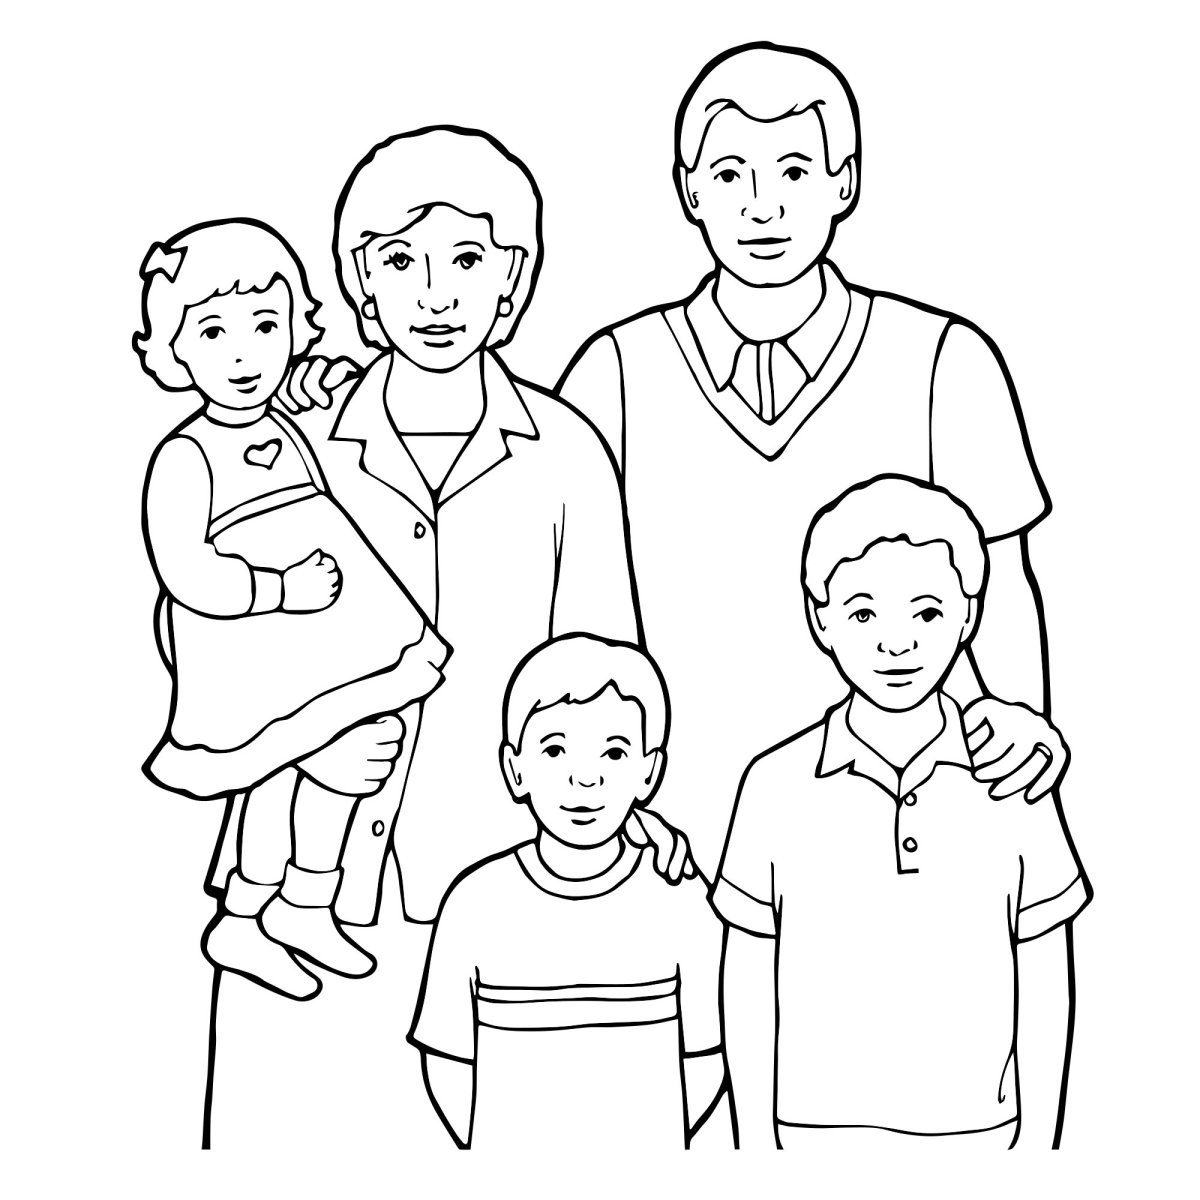 Brilliant family of 5 coloring pages